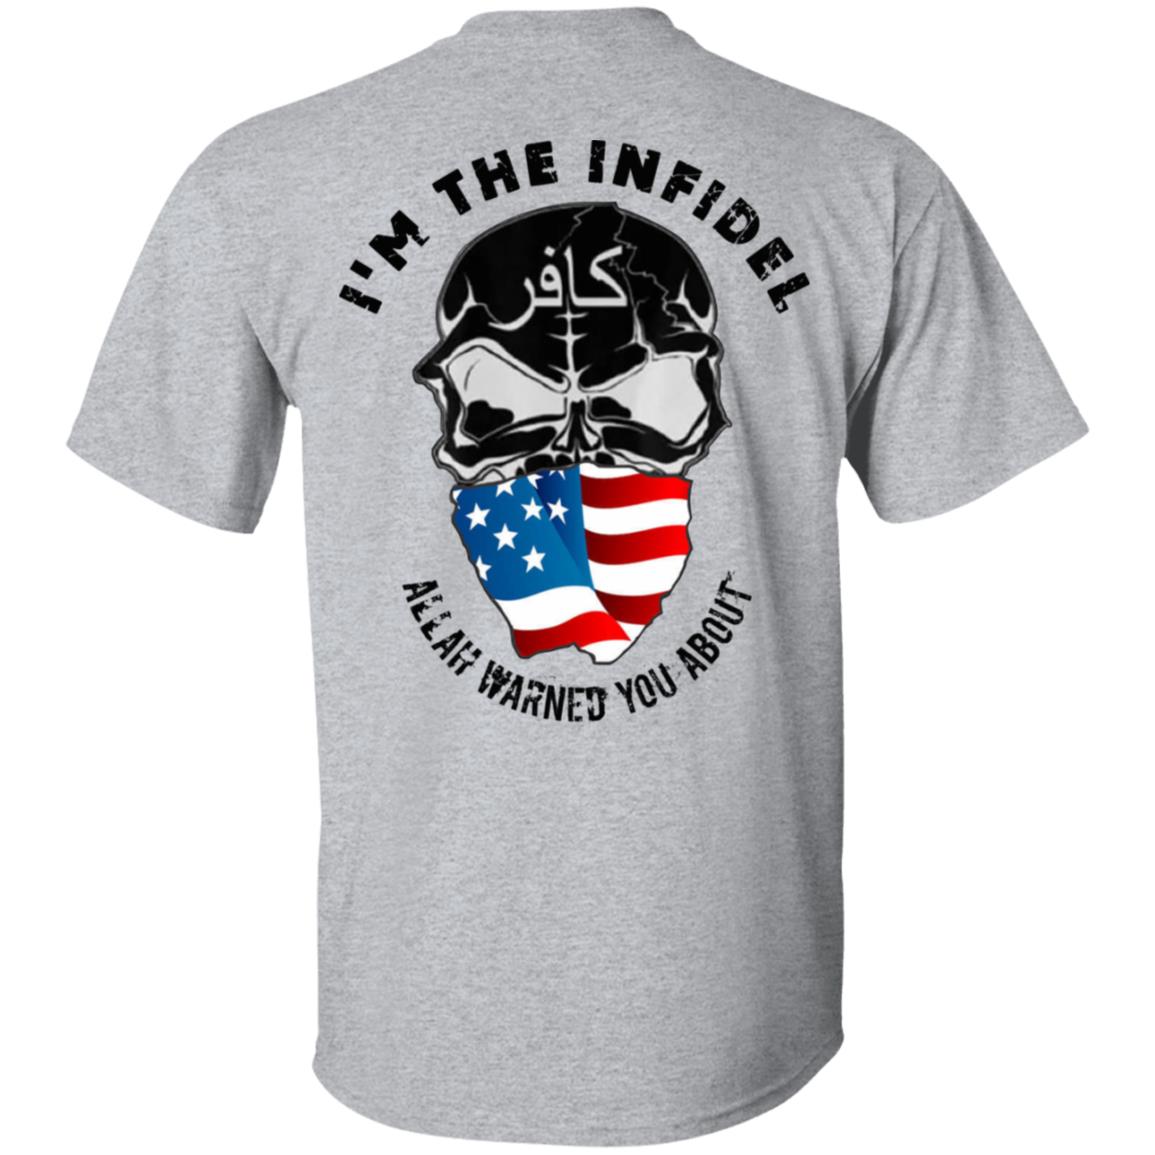 I’m The Infidel Allah Warned You About T-Shirts, Hoodies, Sweatshirt ...